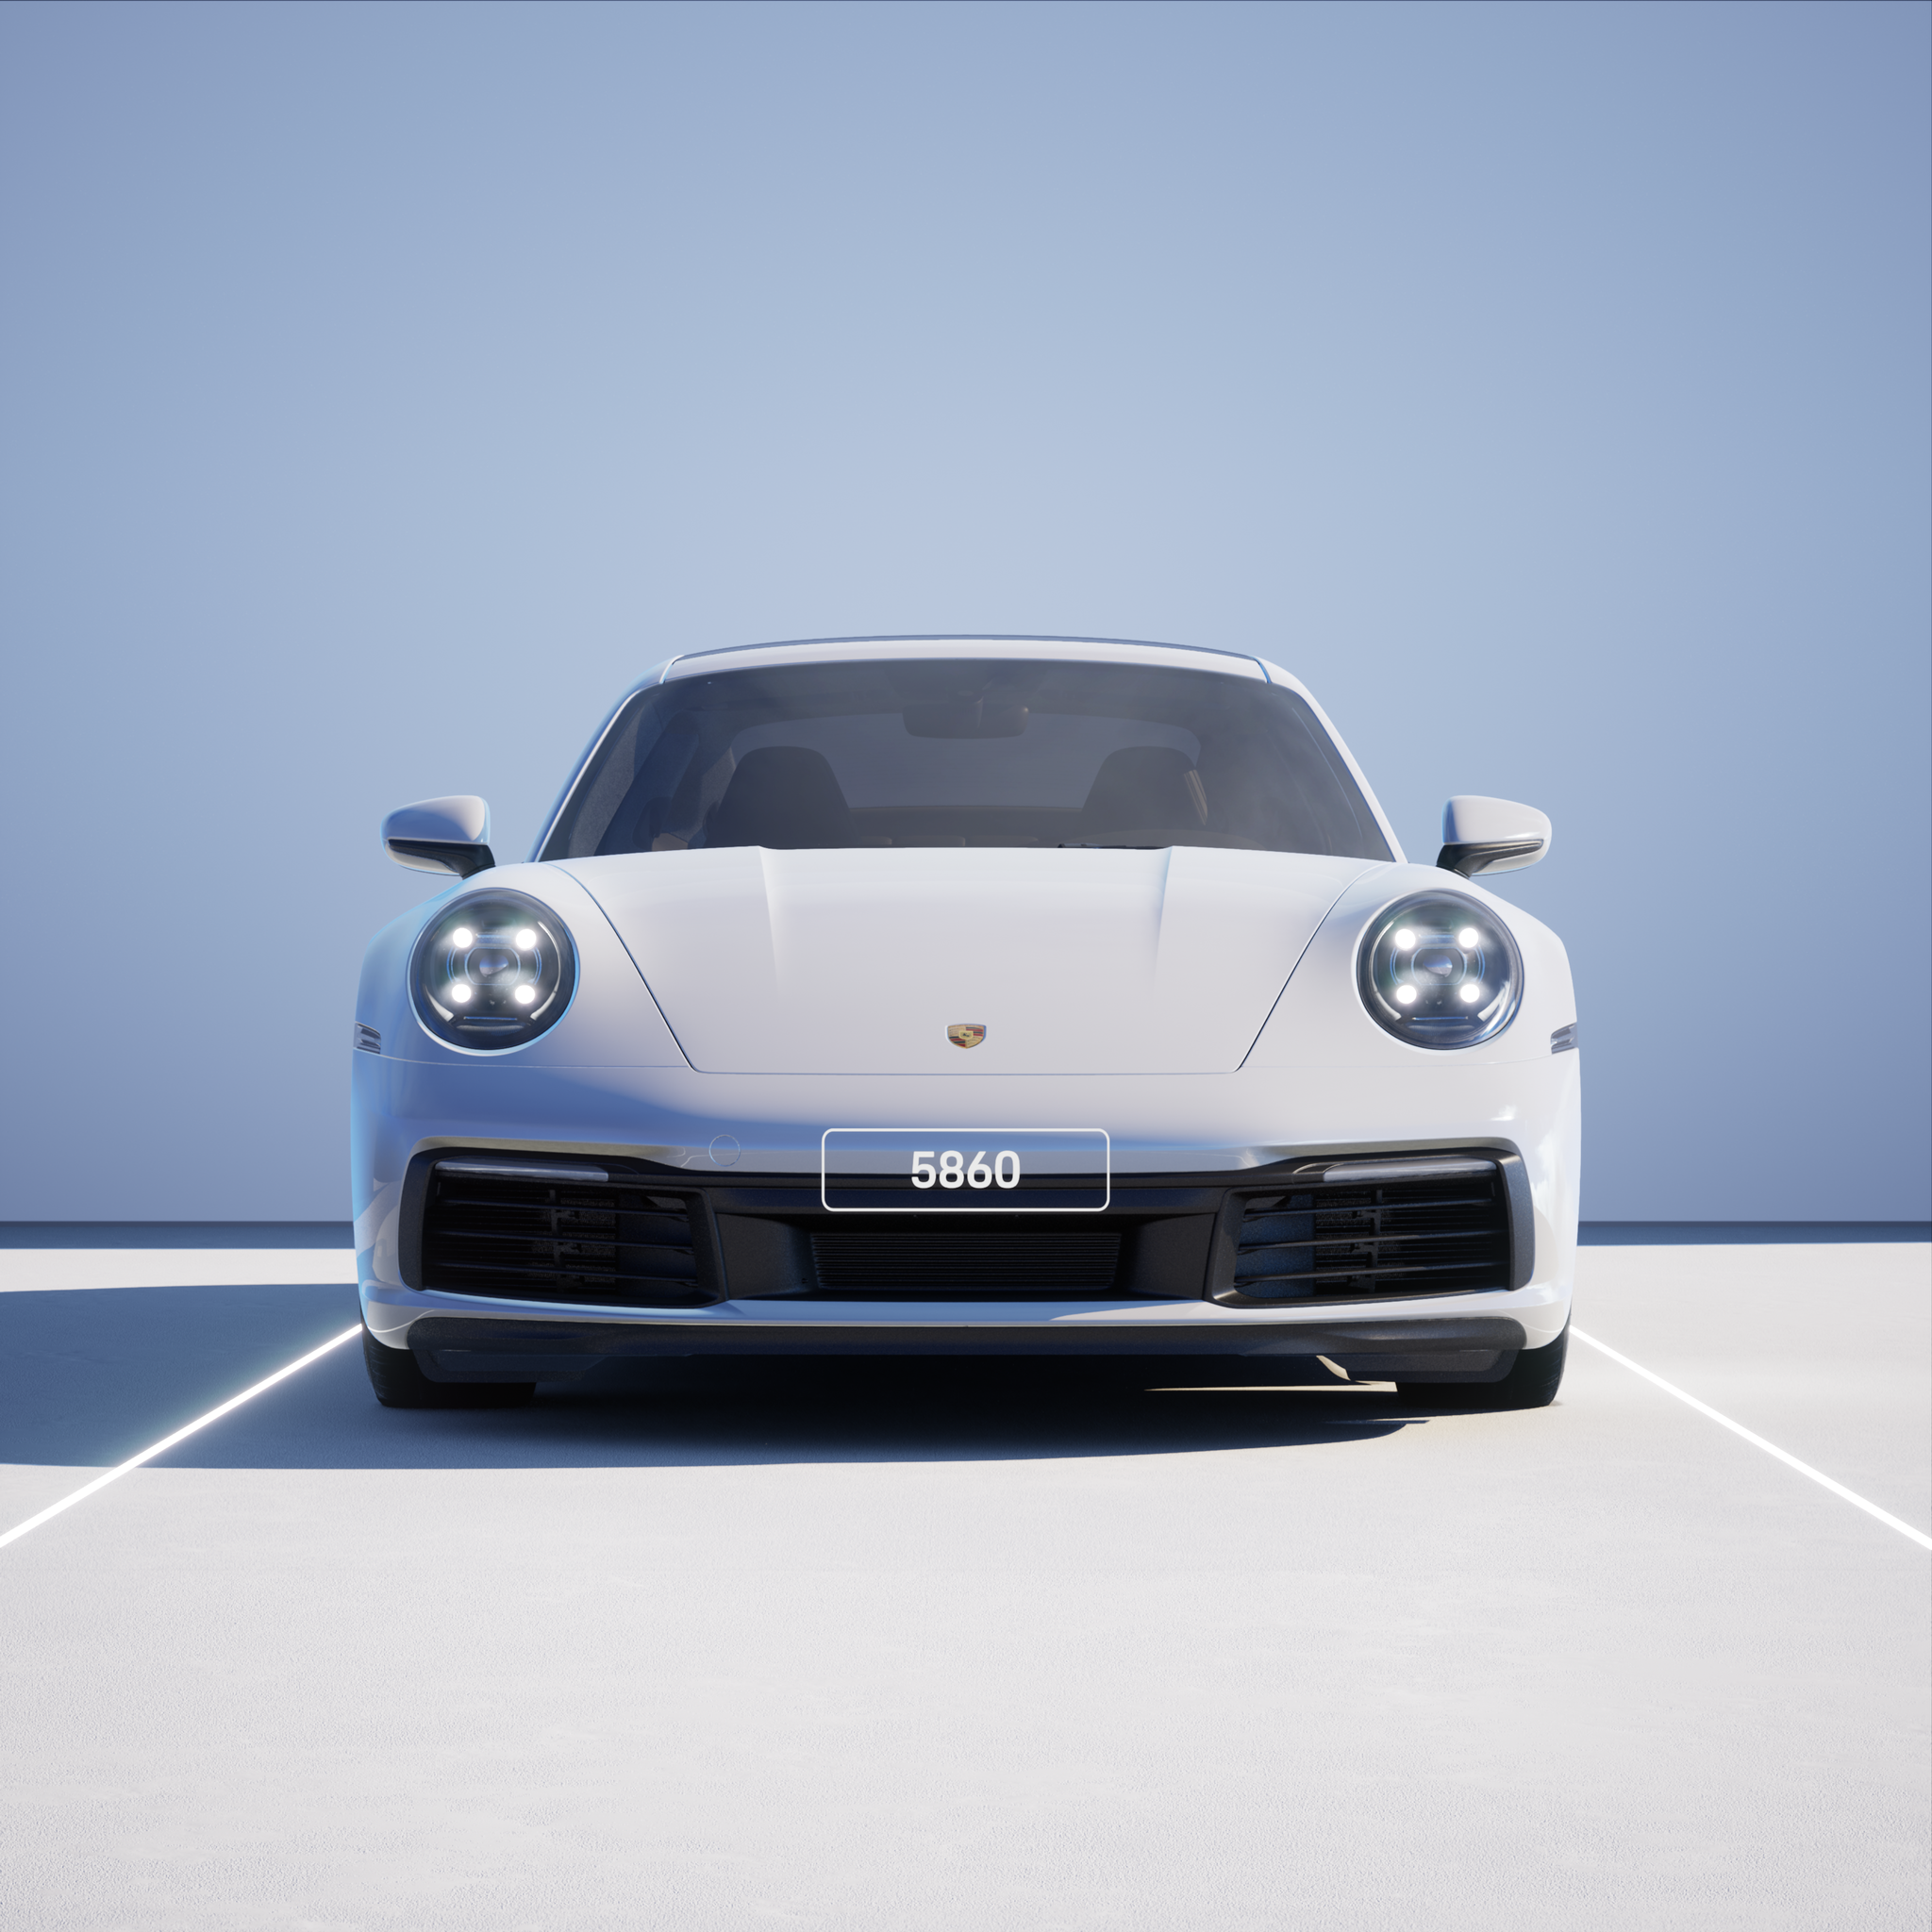 The PORSCHΞ 911 5860 image in phase